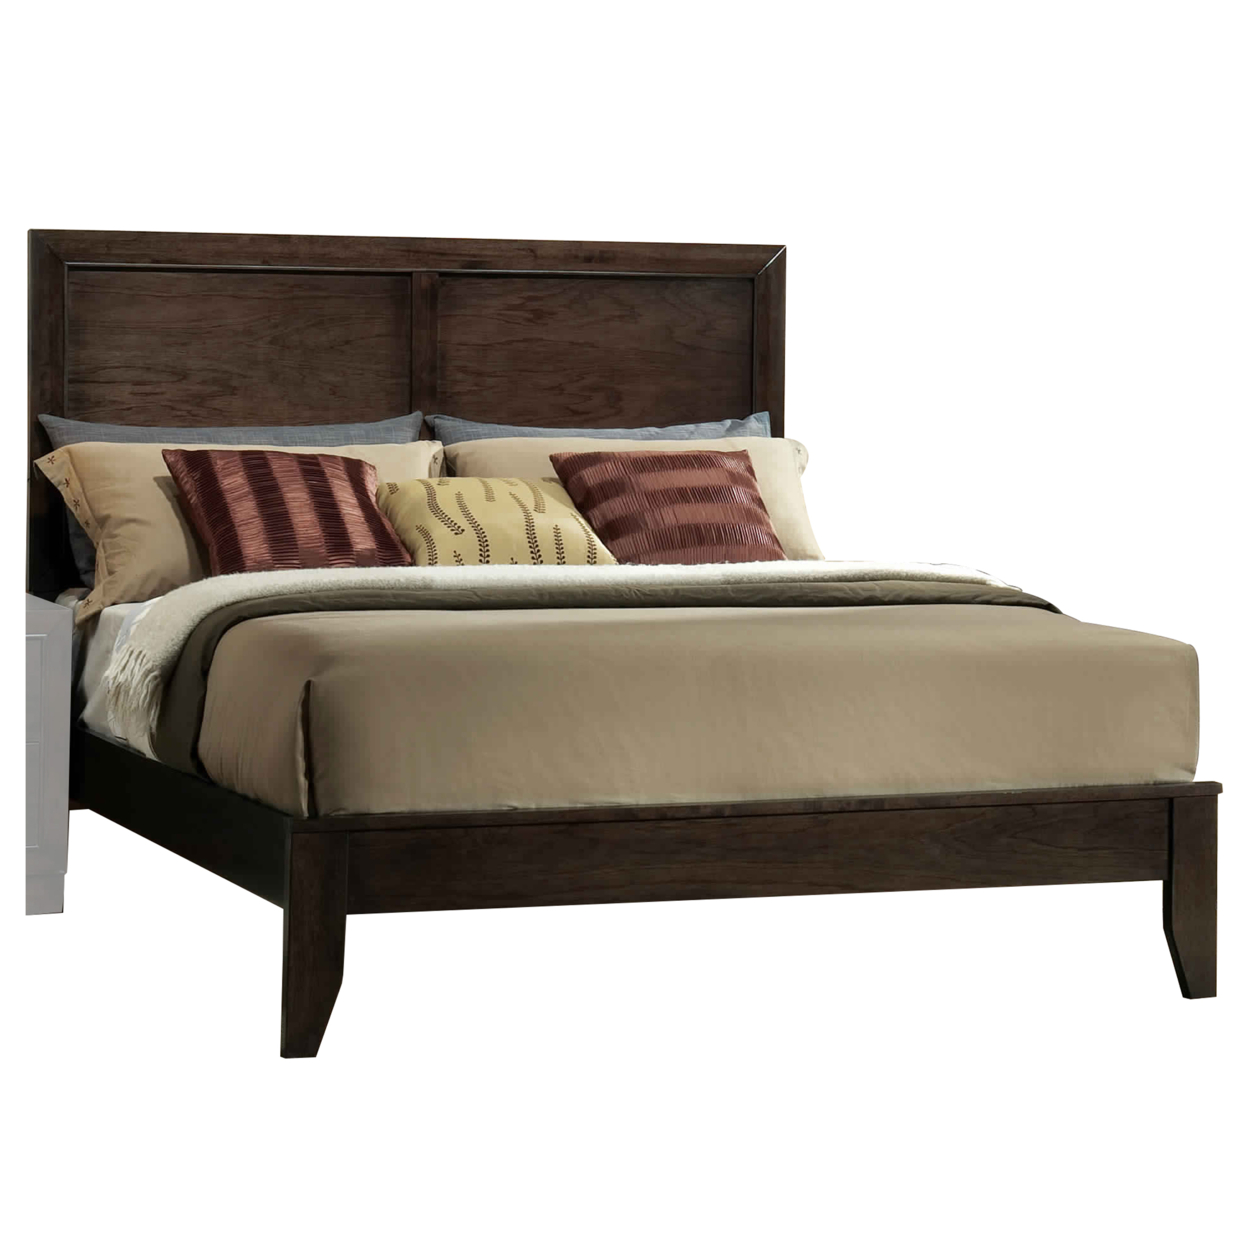 Paneled Eastern King Low Profile Bed With Chamfered Legs, Brown- Saltoro Sherpi